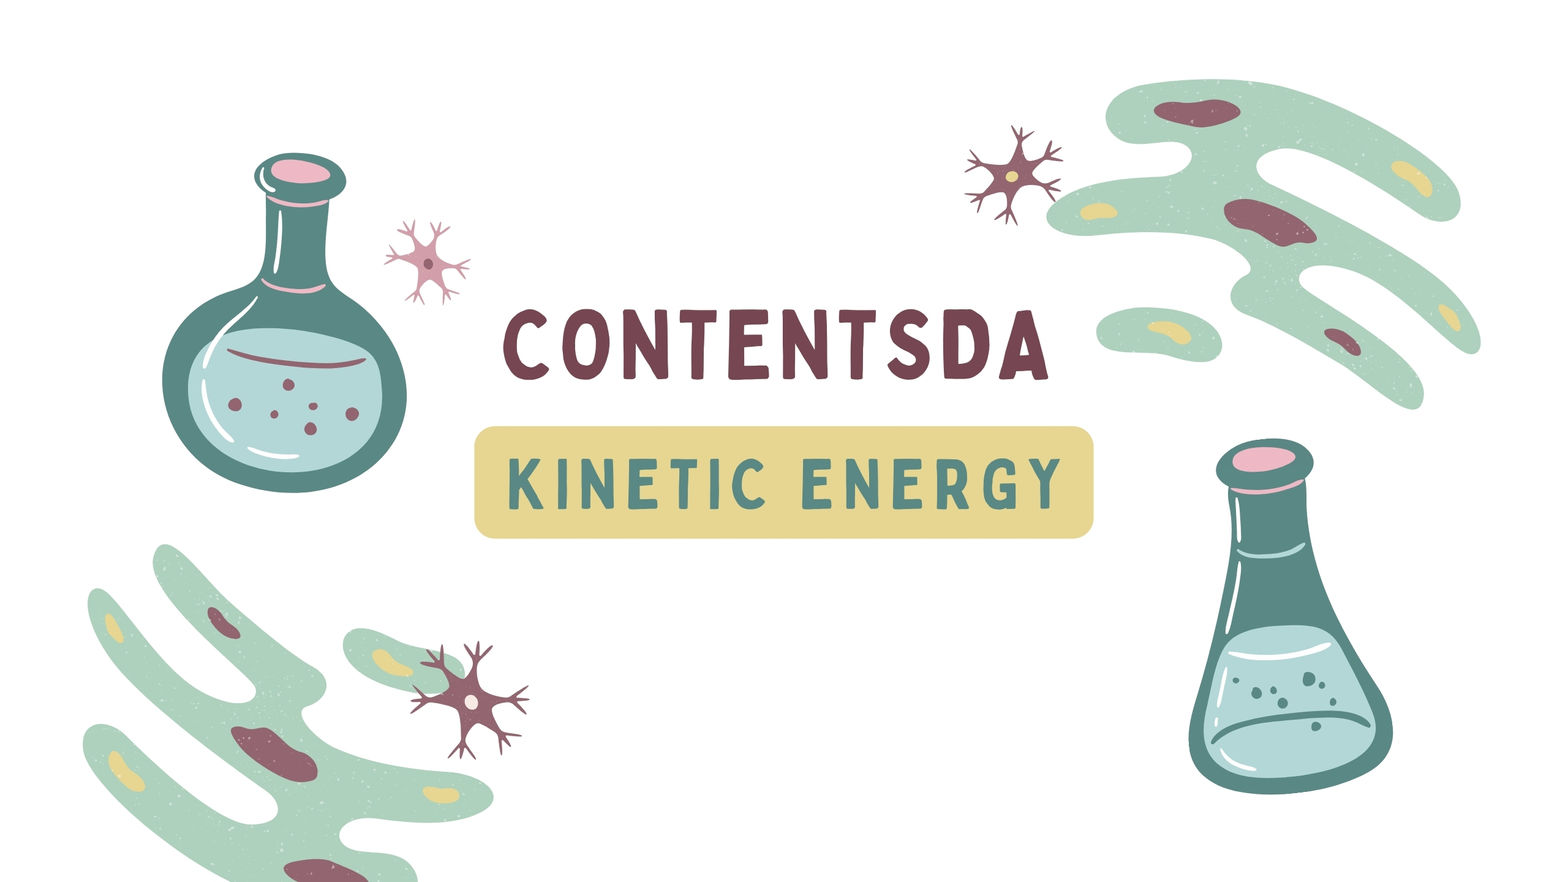 Kinetic Energy Experiment - ContentsDa Science Experiment